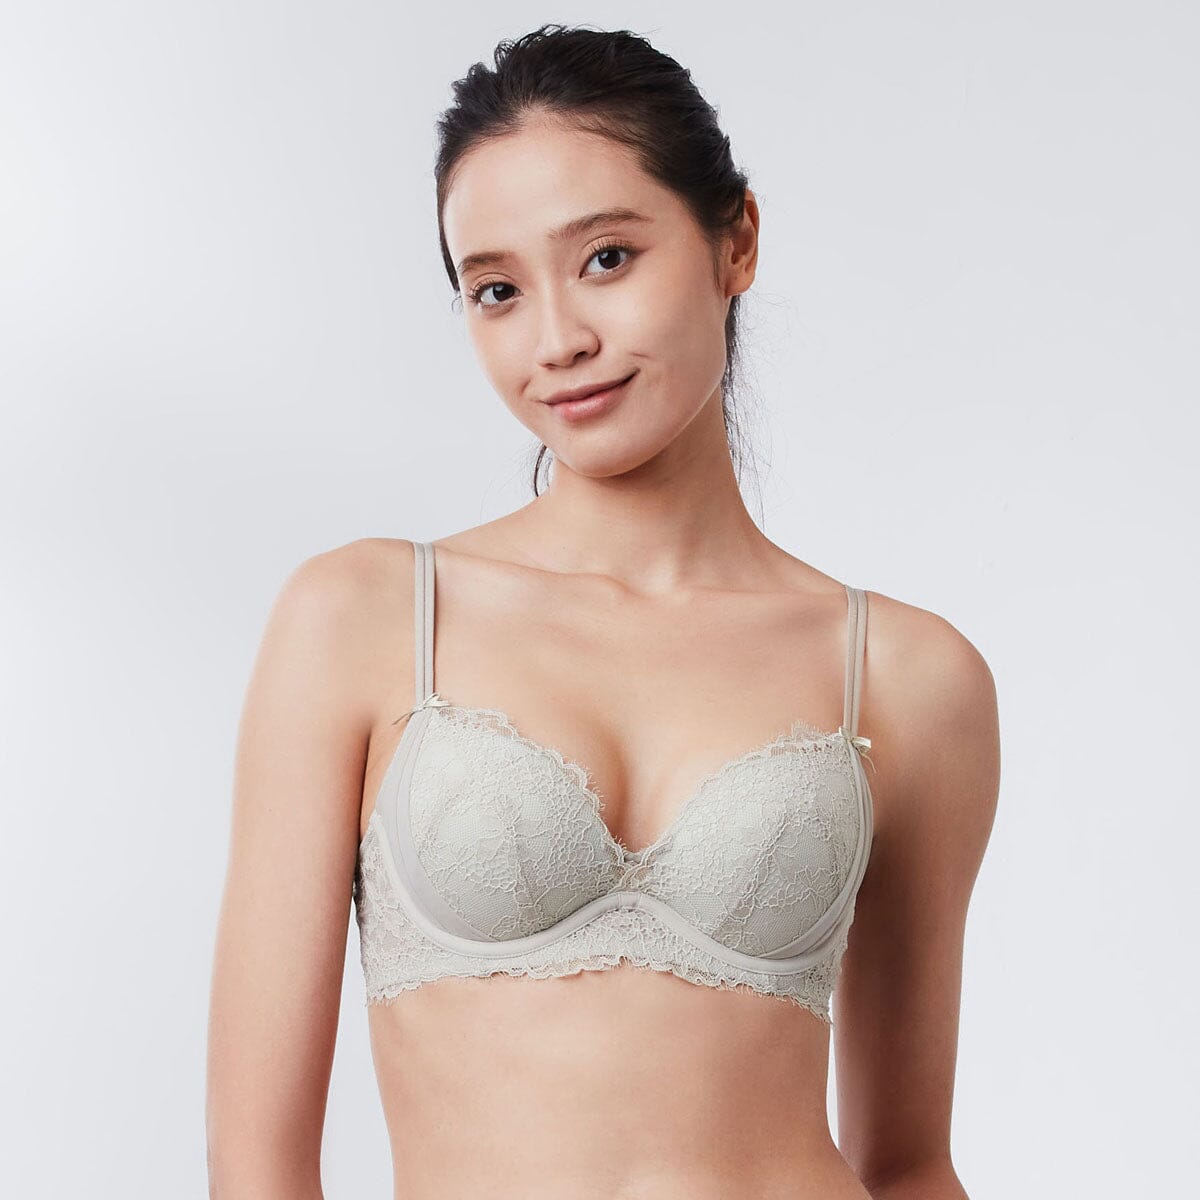 Stylist Plunge Push Up Lace Bra Bra Her Own Words Agate Gray 70A 